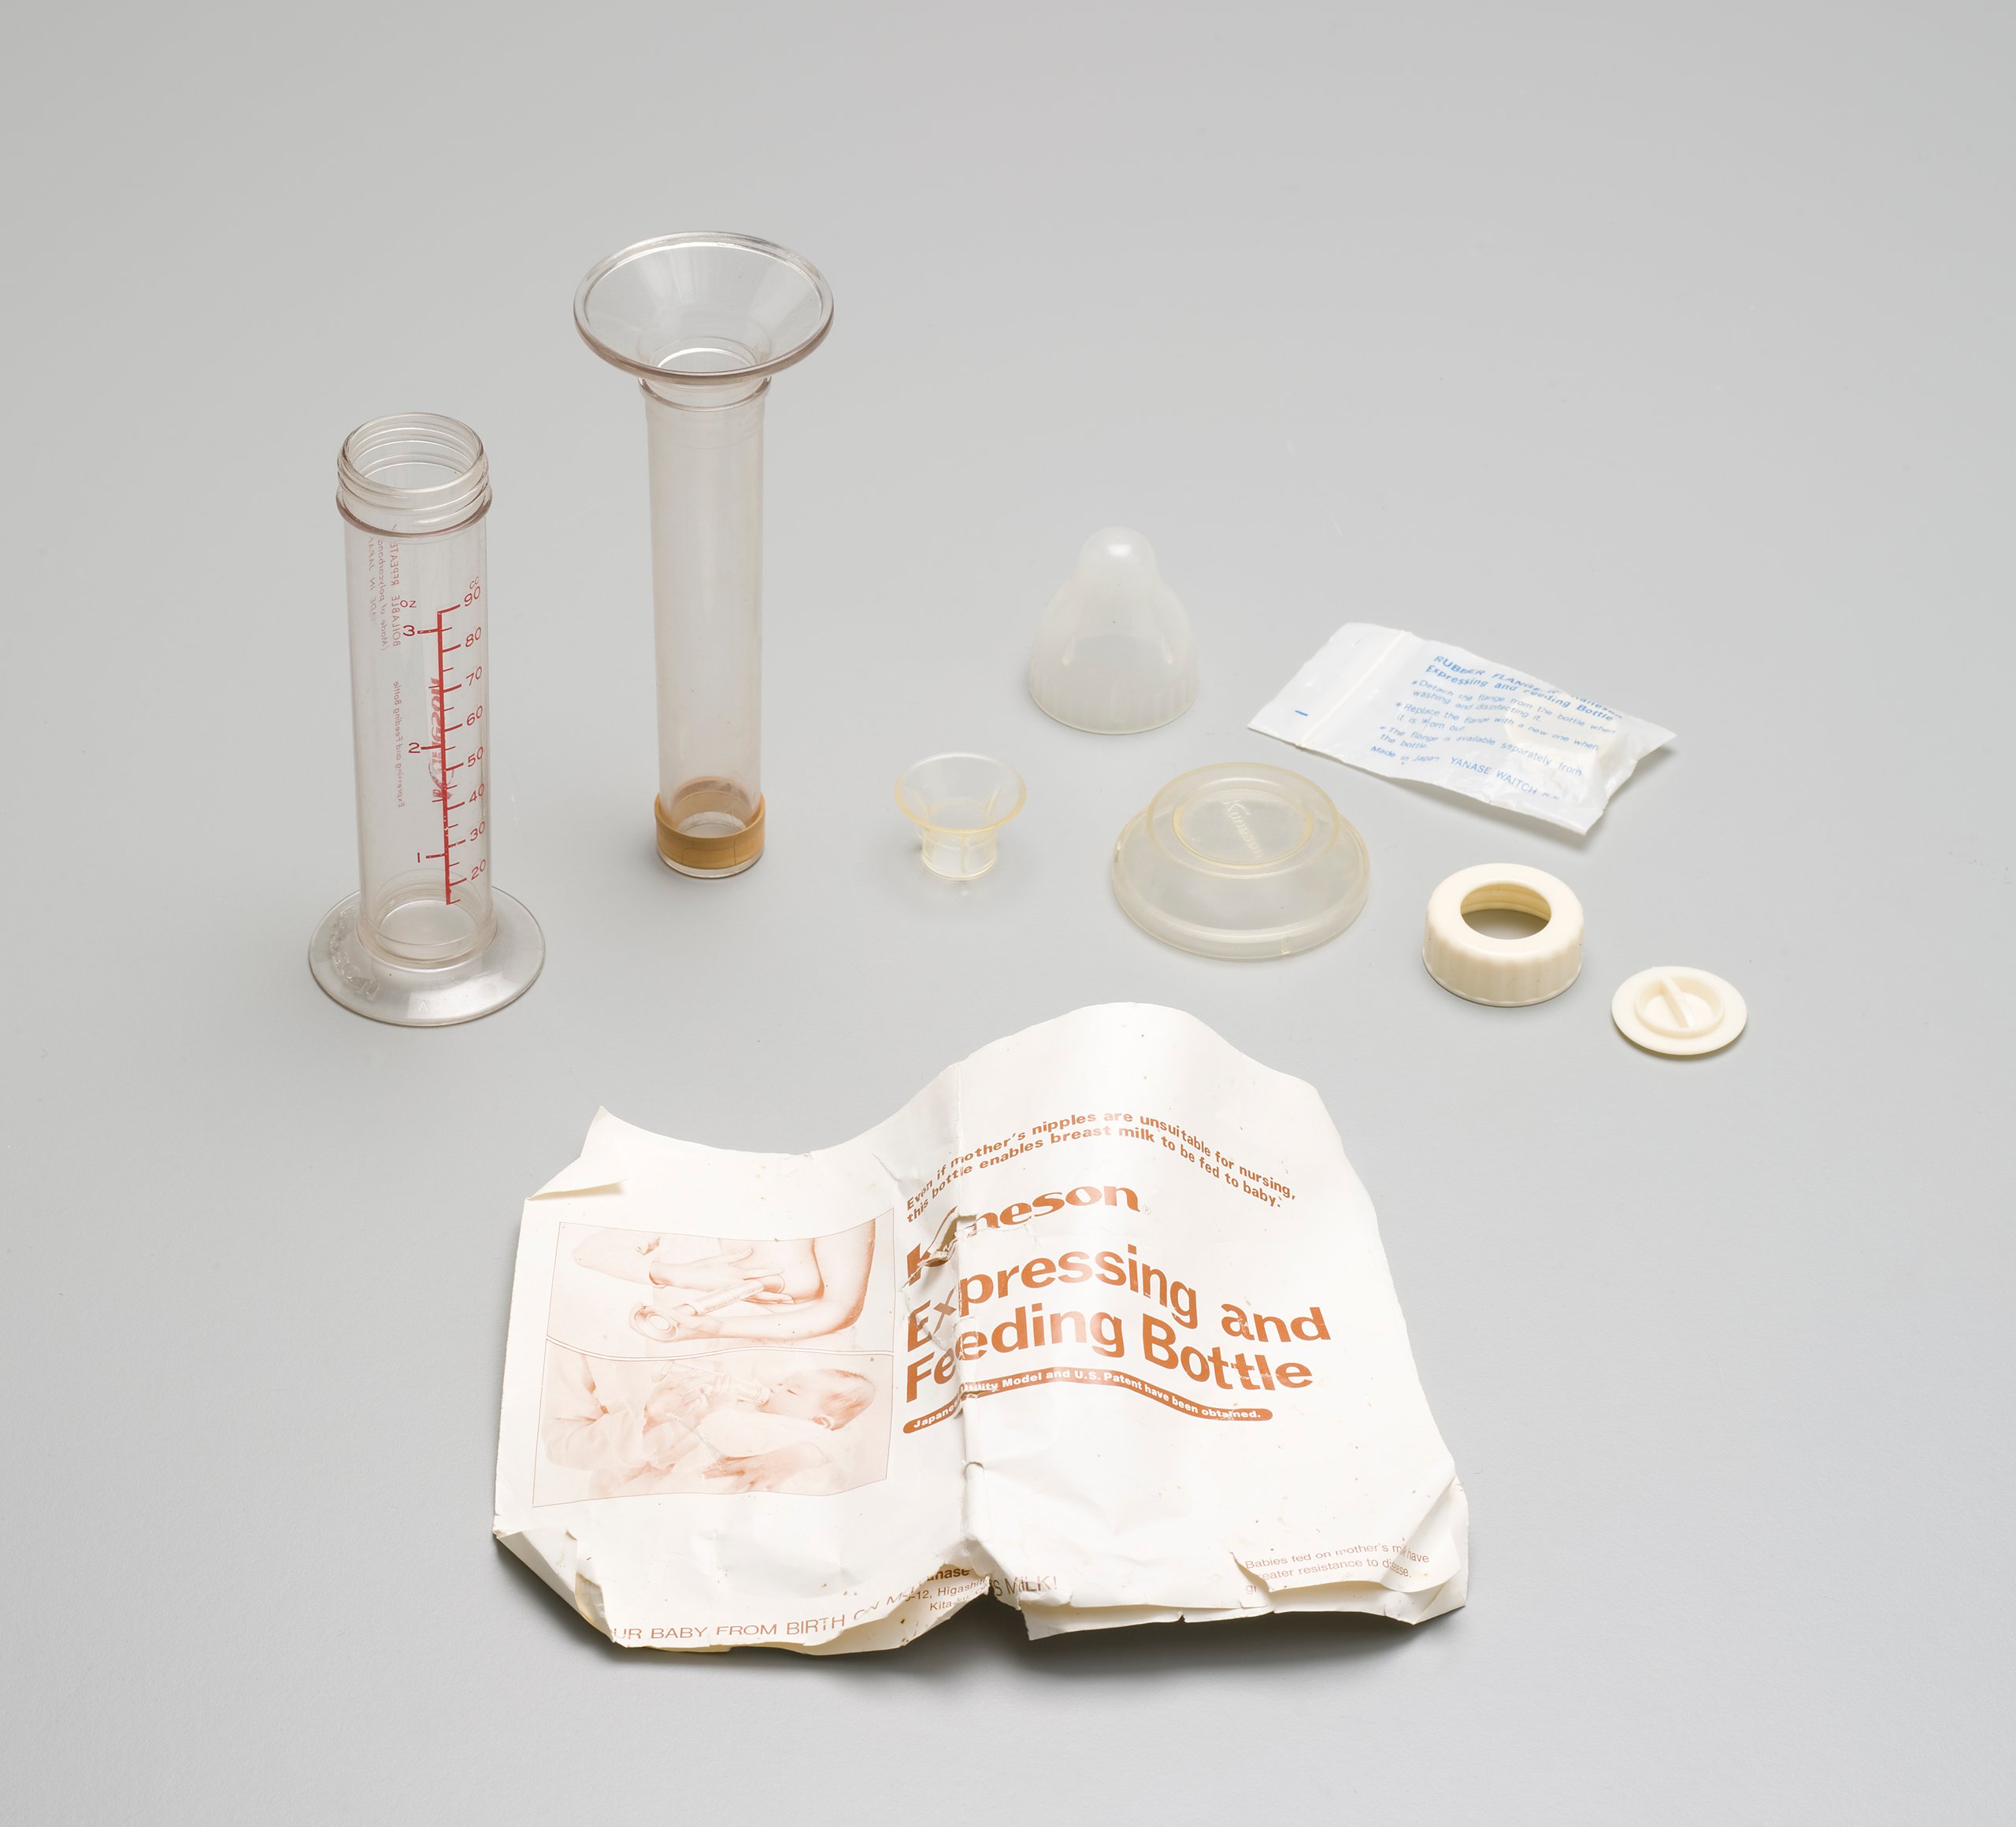 'Kaneson Expressing and Feeding Bottle' breast pump